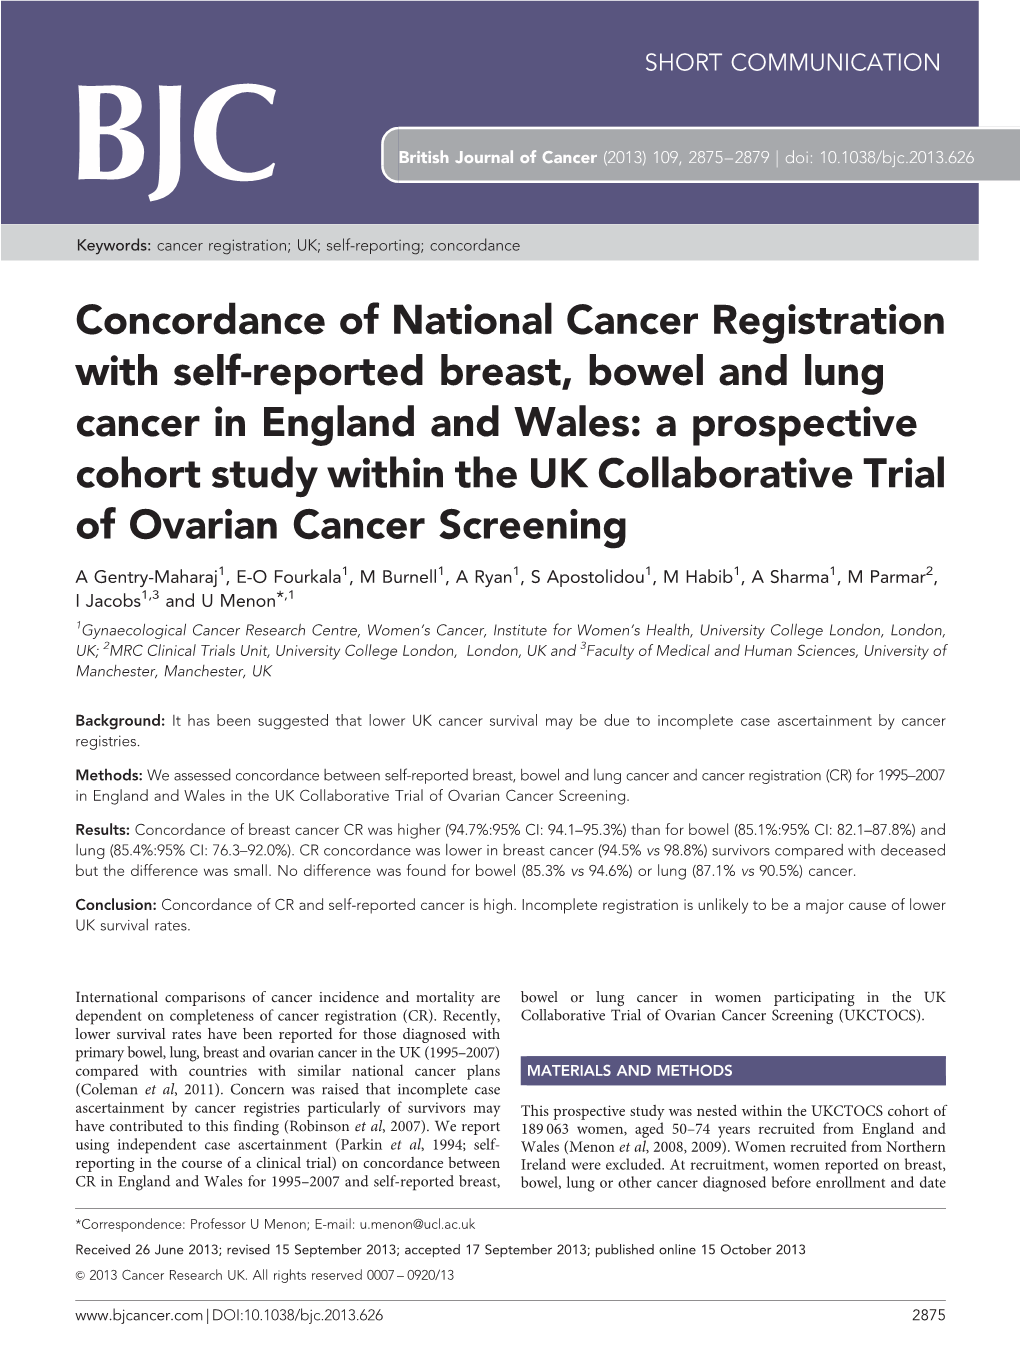 Concordance of National Cancer Registration with Self-Reported Breast, Bowel and Lung Cancer in England and Wales